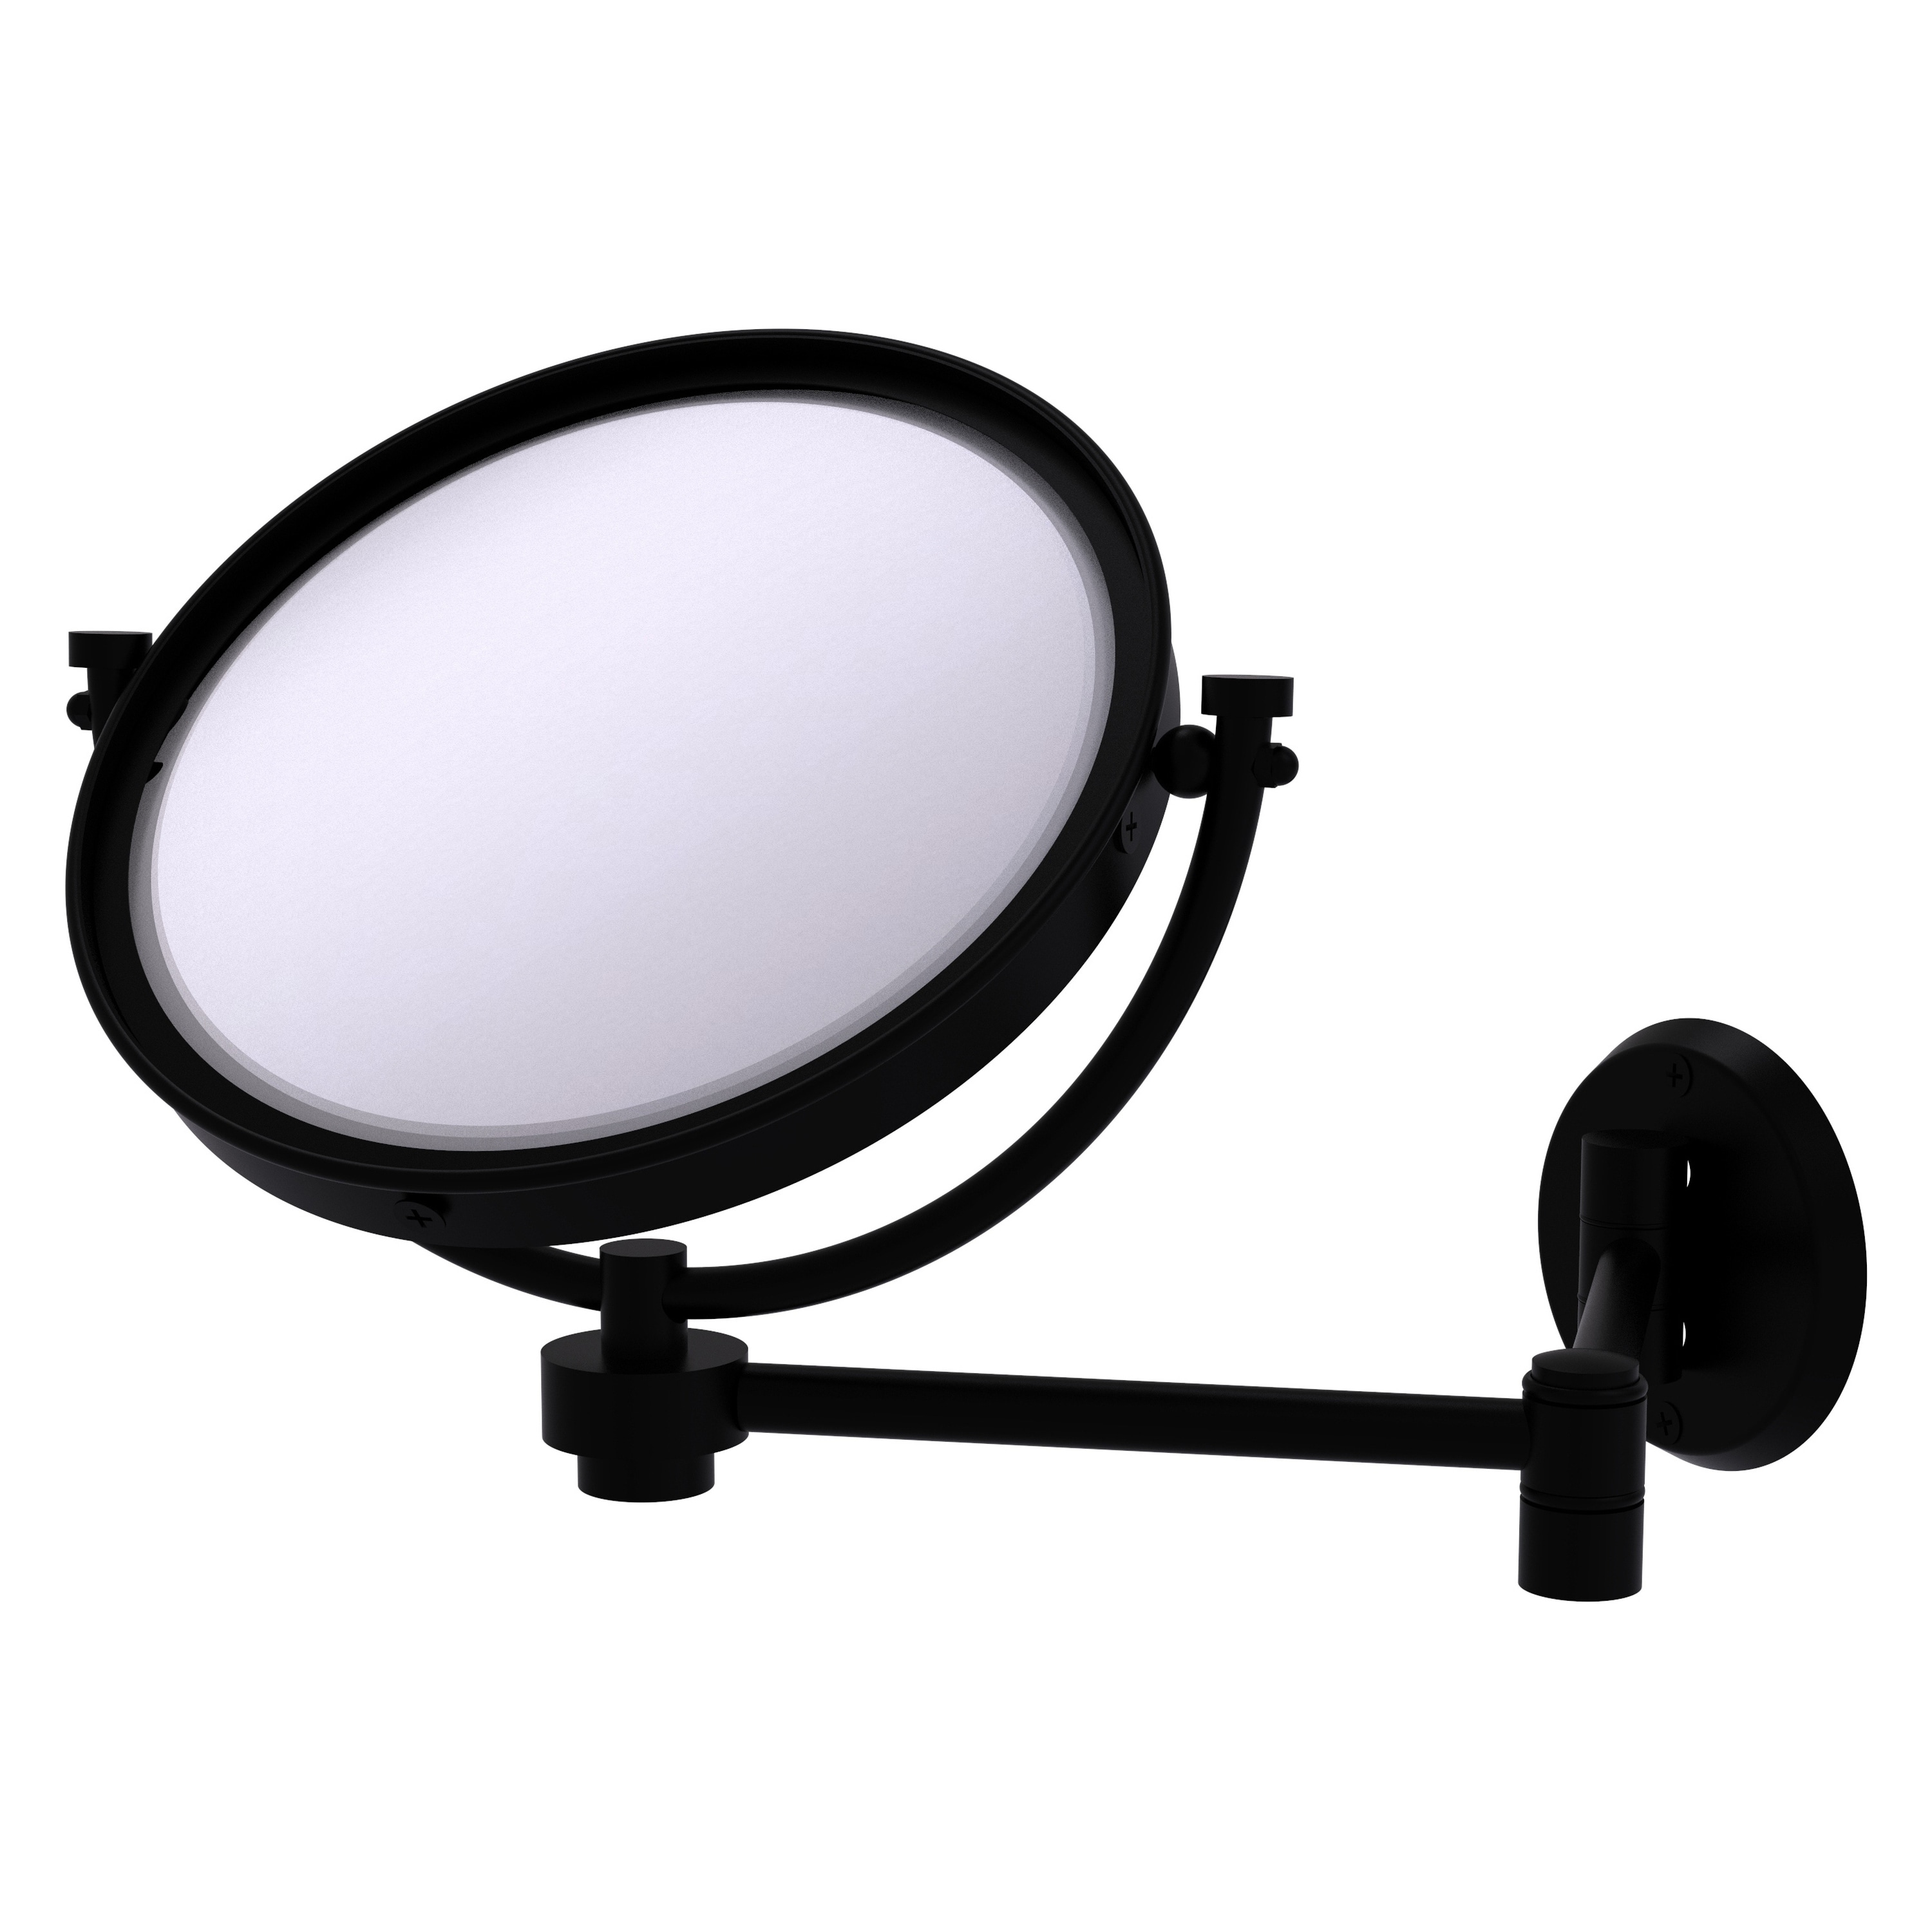 8-in x 10-in Matte Gray Double-sided 2X Magnifying Wall-mounted Vanity Mirror | - Allied Brass WM-6/2X-BKM